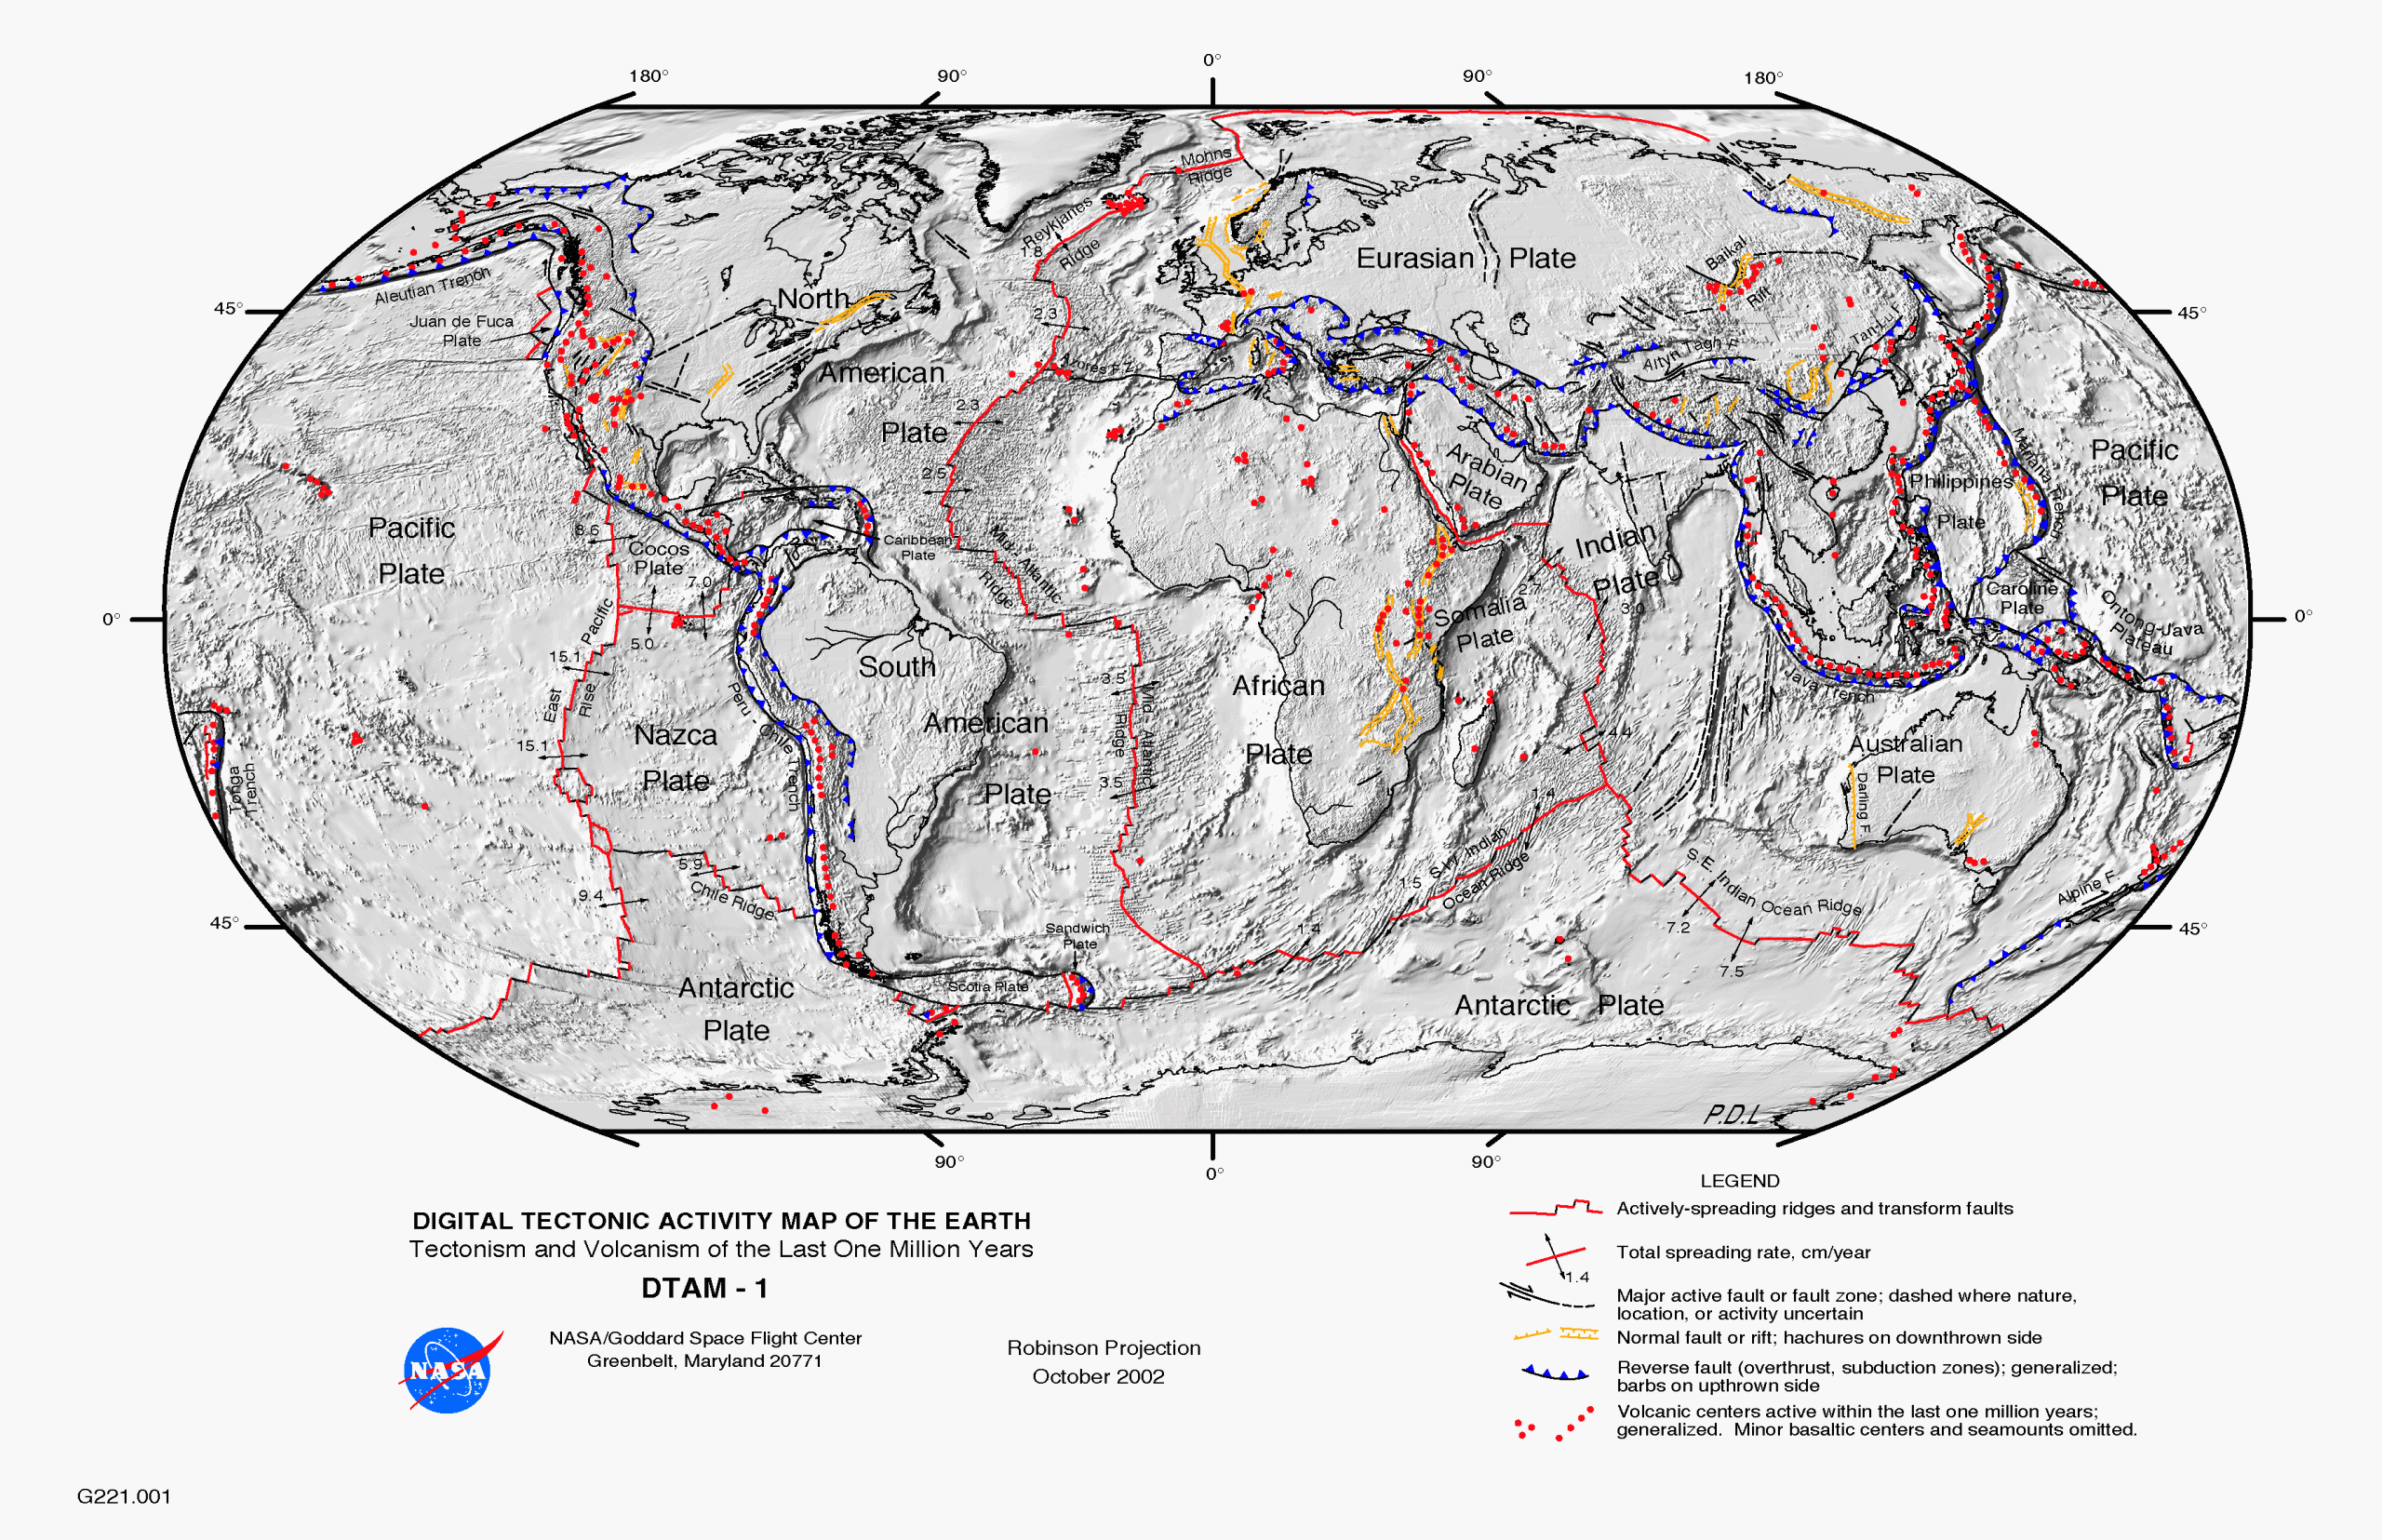 FIgure is a detailed map of Earth's tectonic plates and their boundaries. Boundaries with arrows pointing away from each other are divergent boundaries. Boundaries with teeth on the line are convergent boundaries. Boundaries with ticks on the lines are normal faults. Dots represent volcanoes.